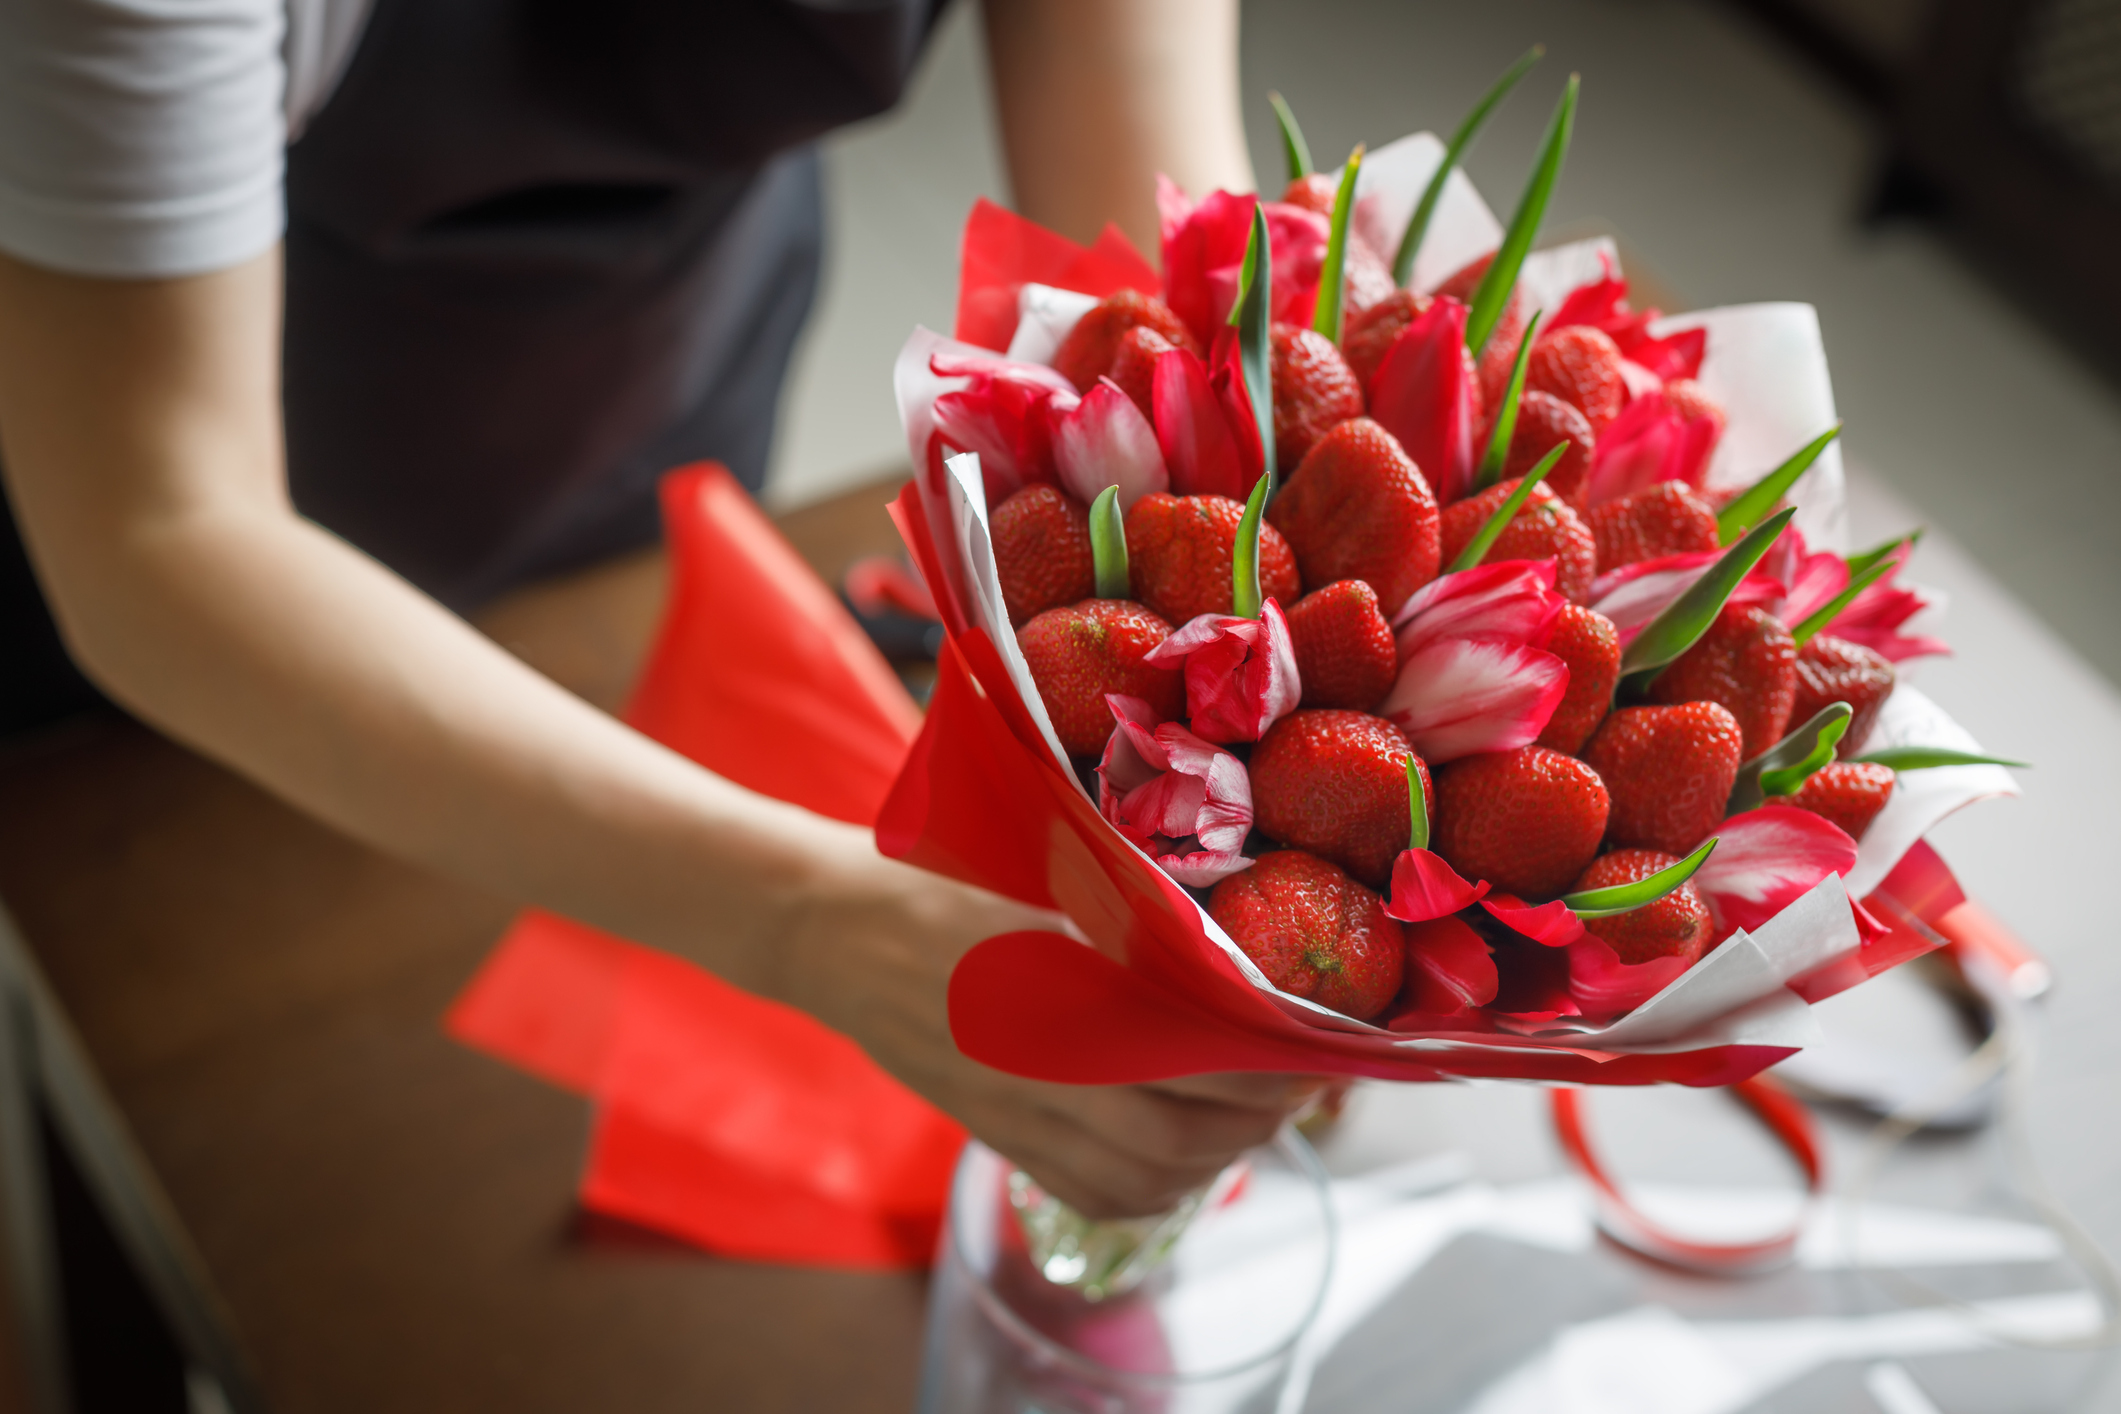 Woman in a black apron puts in a vase a beautiful original bouquet of tulips and strawberries